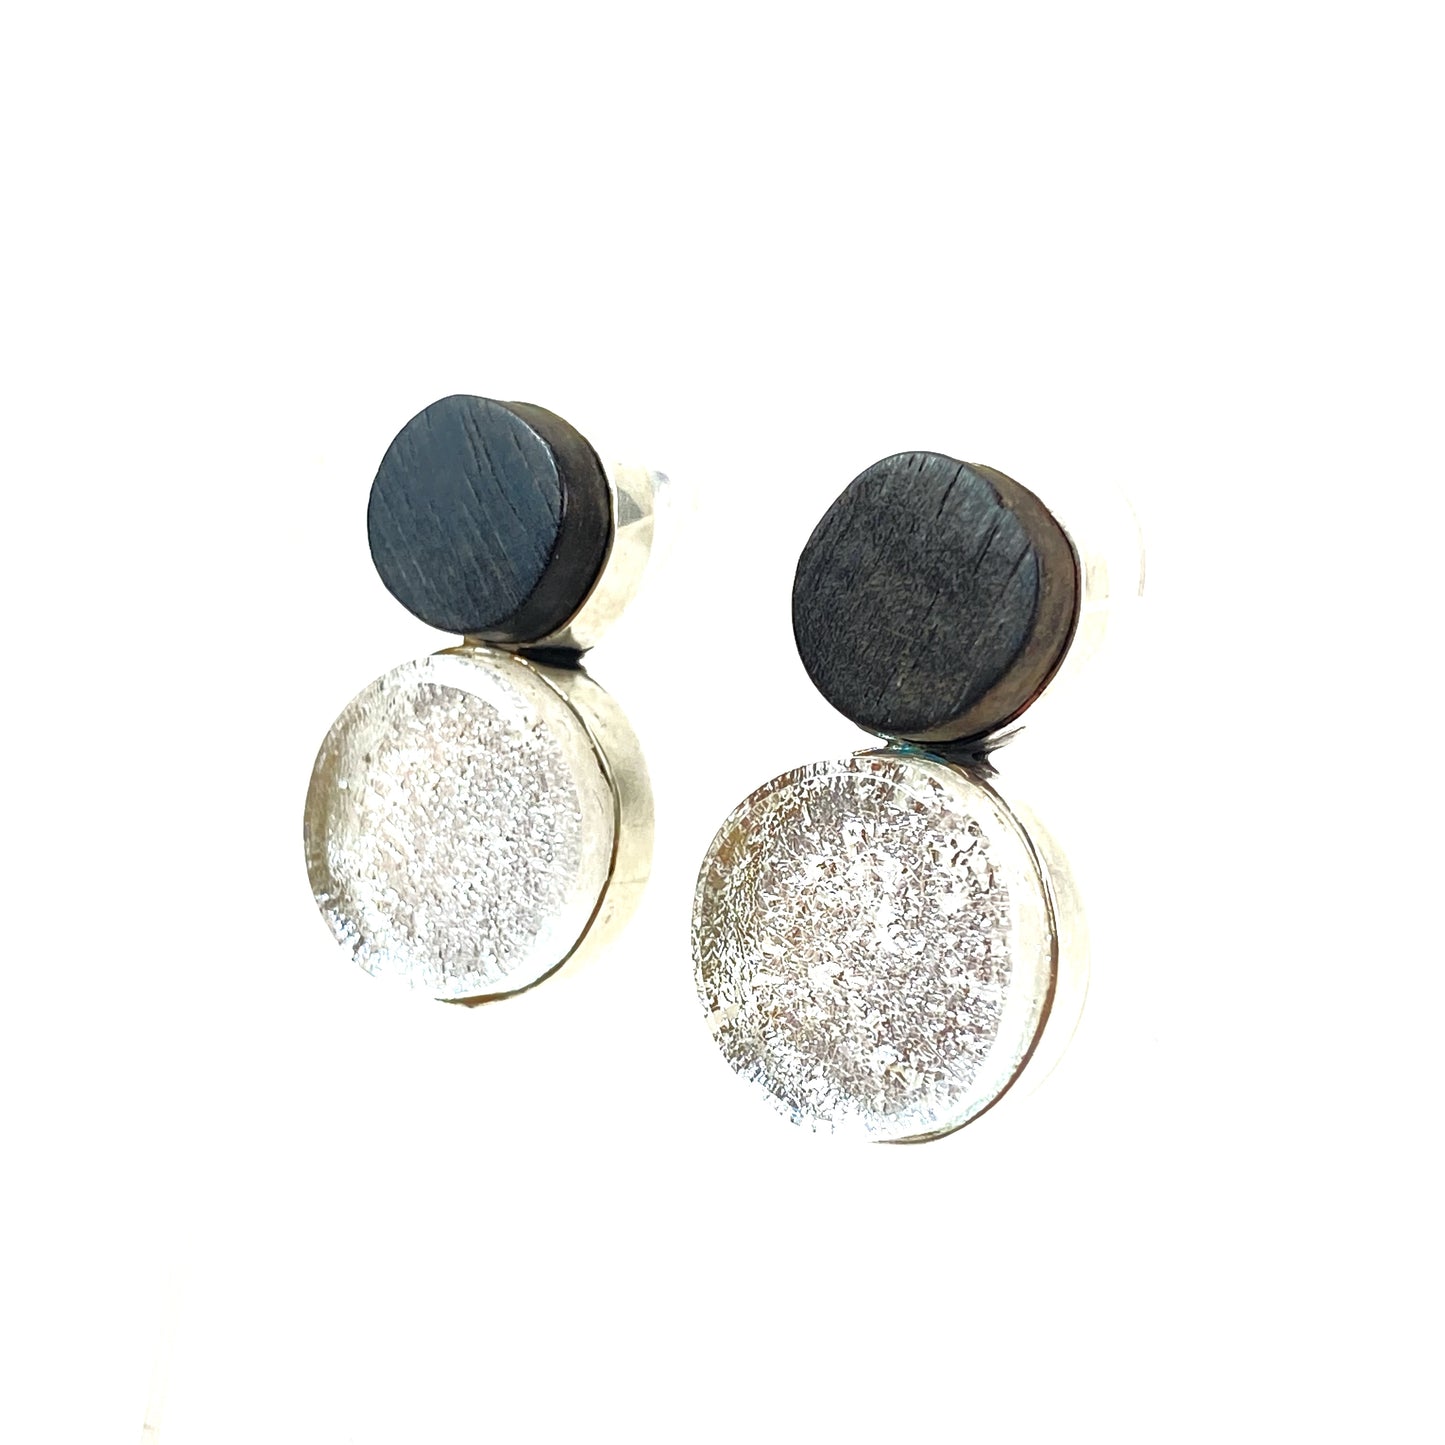 Mid century modern inspired earrings, hand cut ebony wood circles, pearl white glass circles, post earrings, fused glass, glass jewelry, glass and silver jewelry, handmade, handcrafted, American Craft, hand fabricated jewelry, hand fabricated jewellery, Athen, Georgia, colorful jewelry, sparkle, bullseye glass, dichroic glass, art jewelry